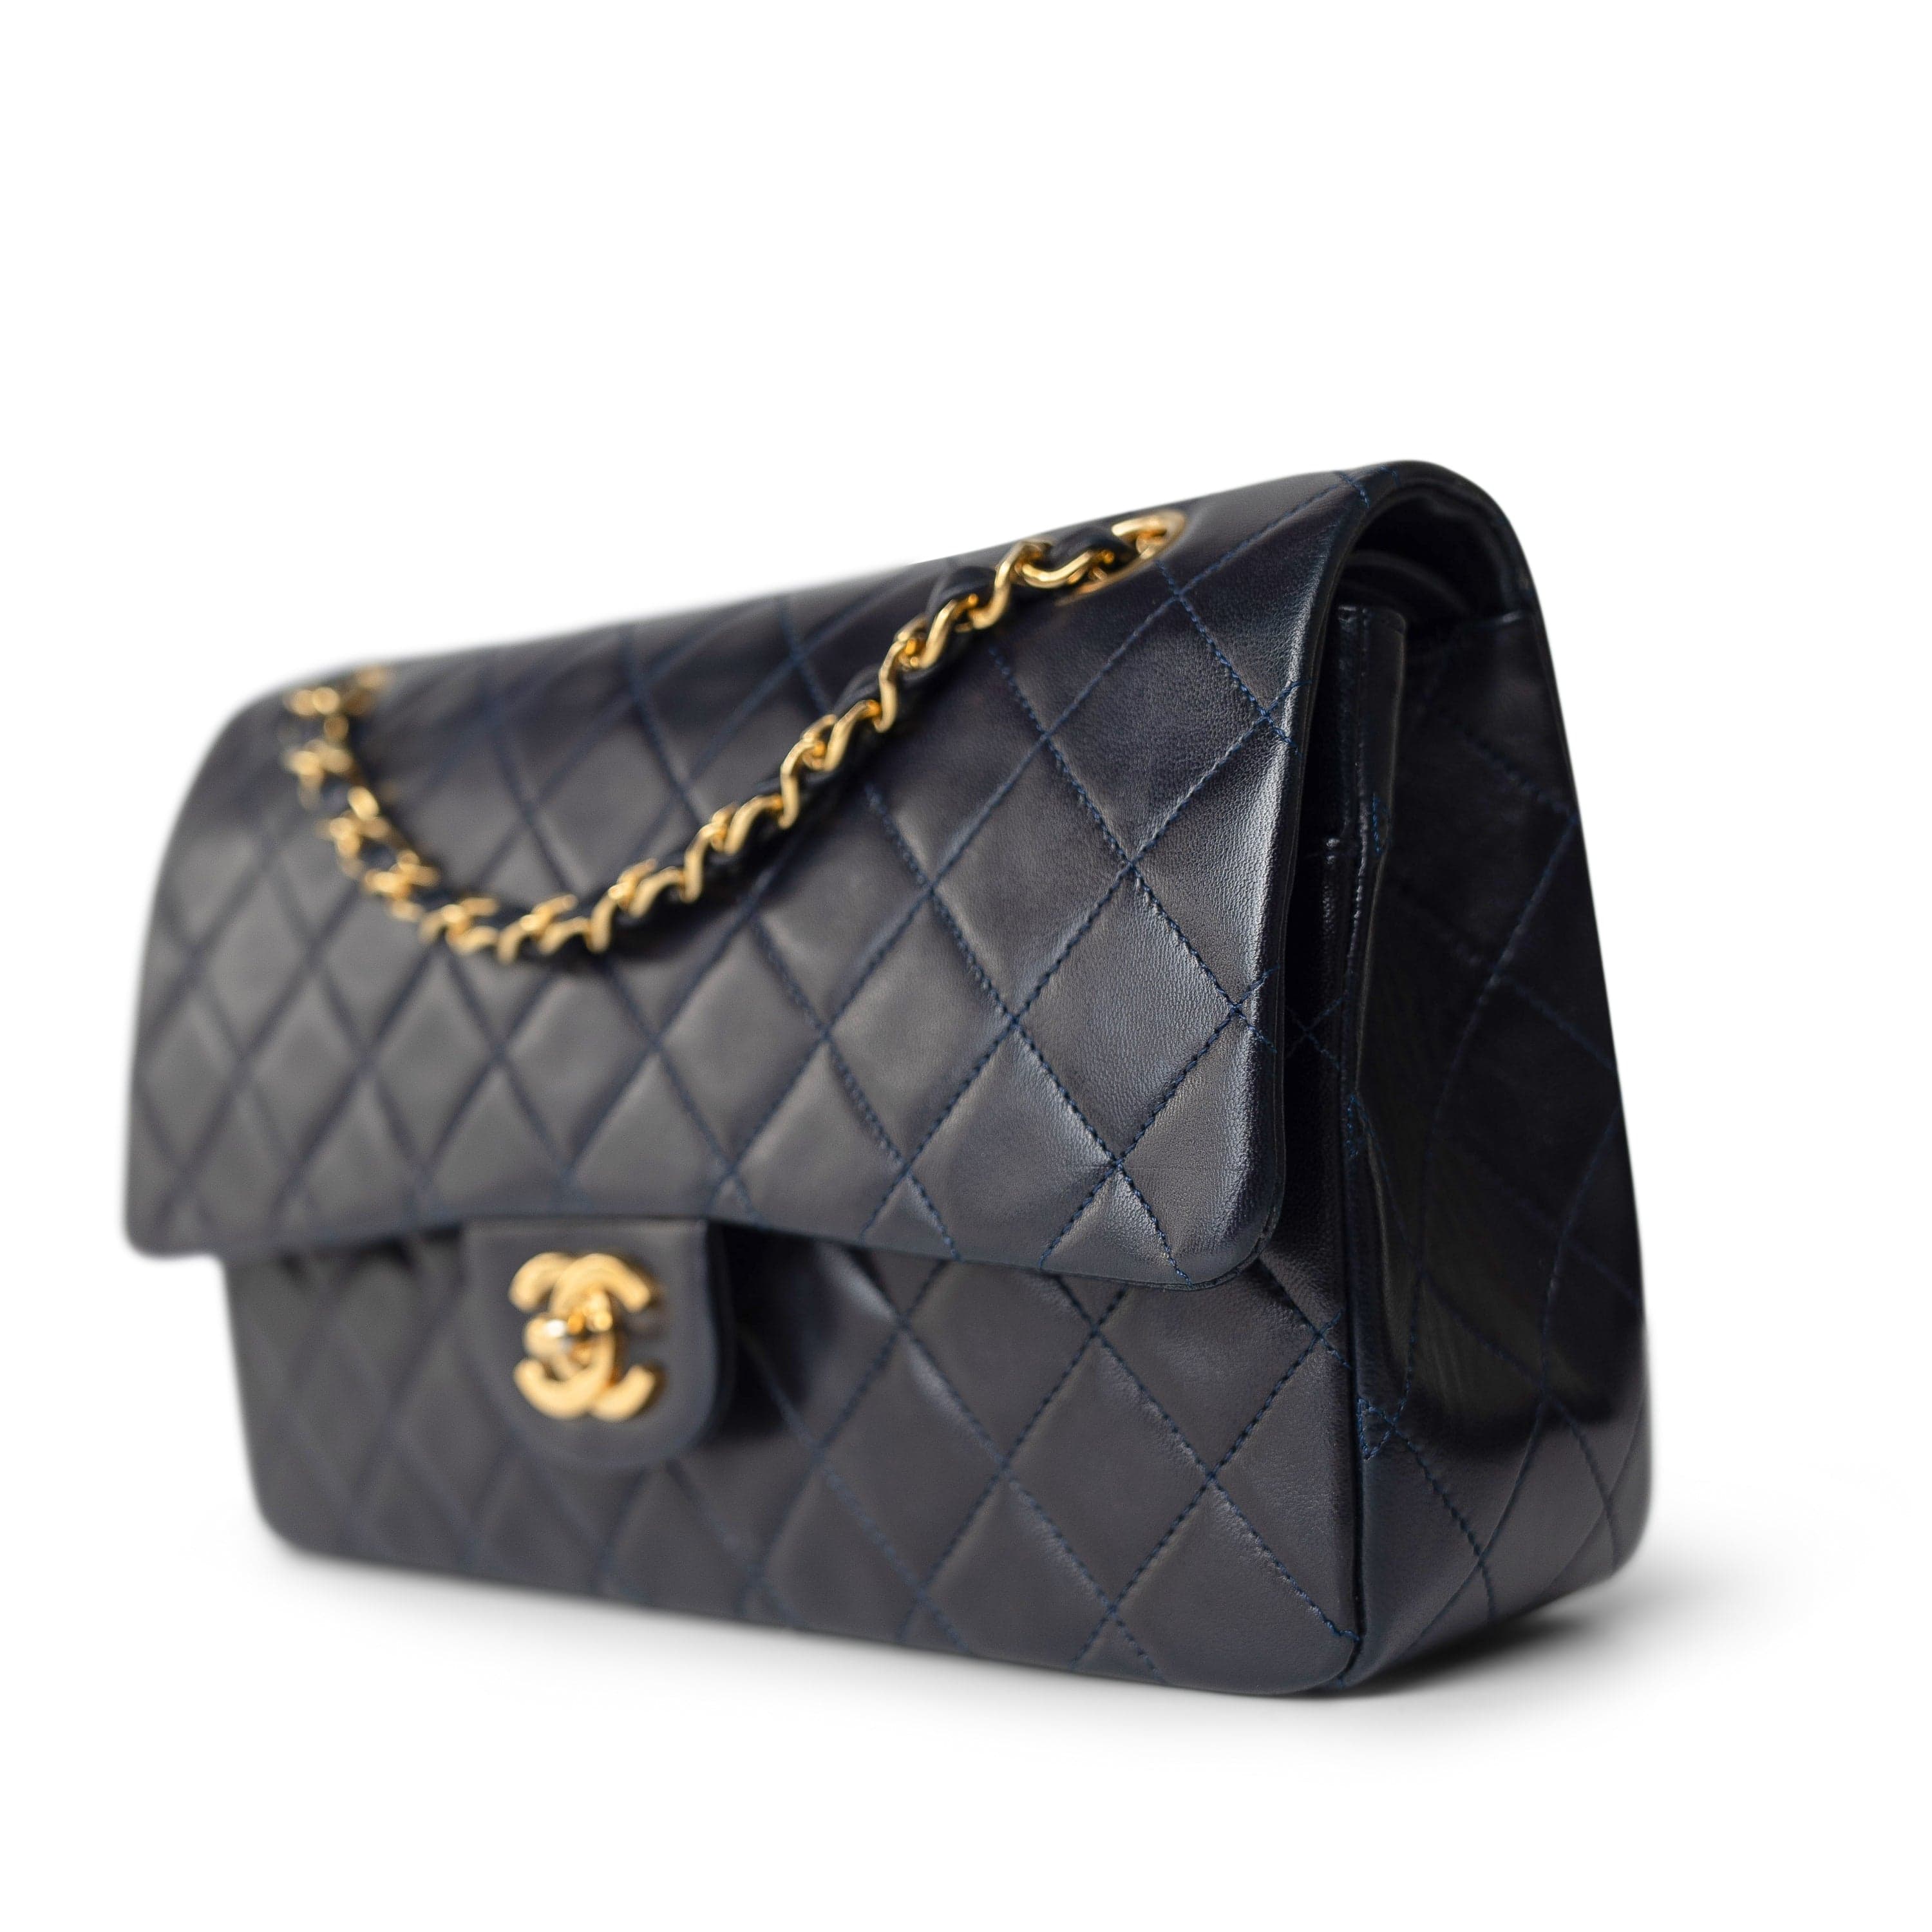 CHANEL Handbag Navy / Classic flap Vintage Navy Lambskin Quilted Classic Flap Medium Gold Hardware - Redeluxe